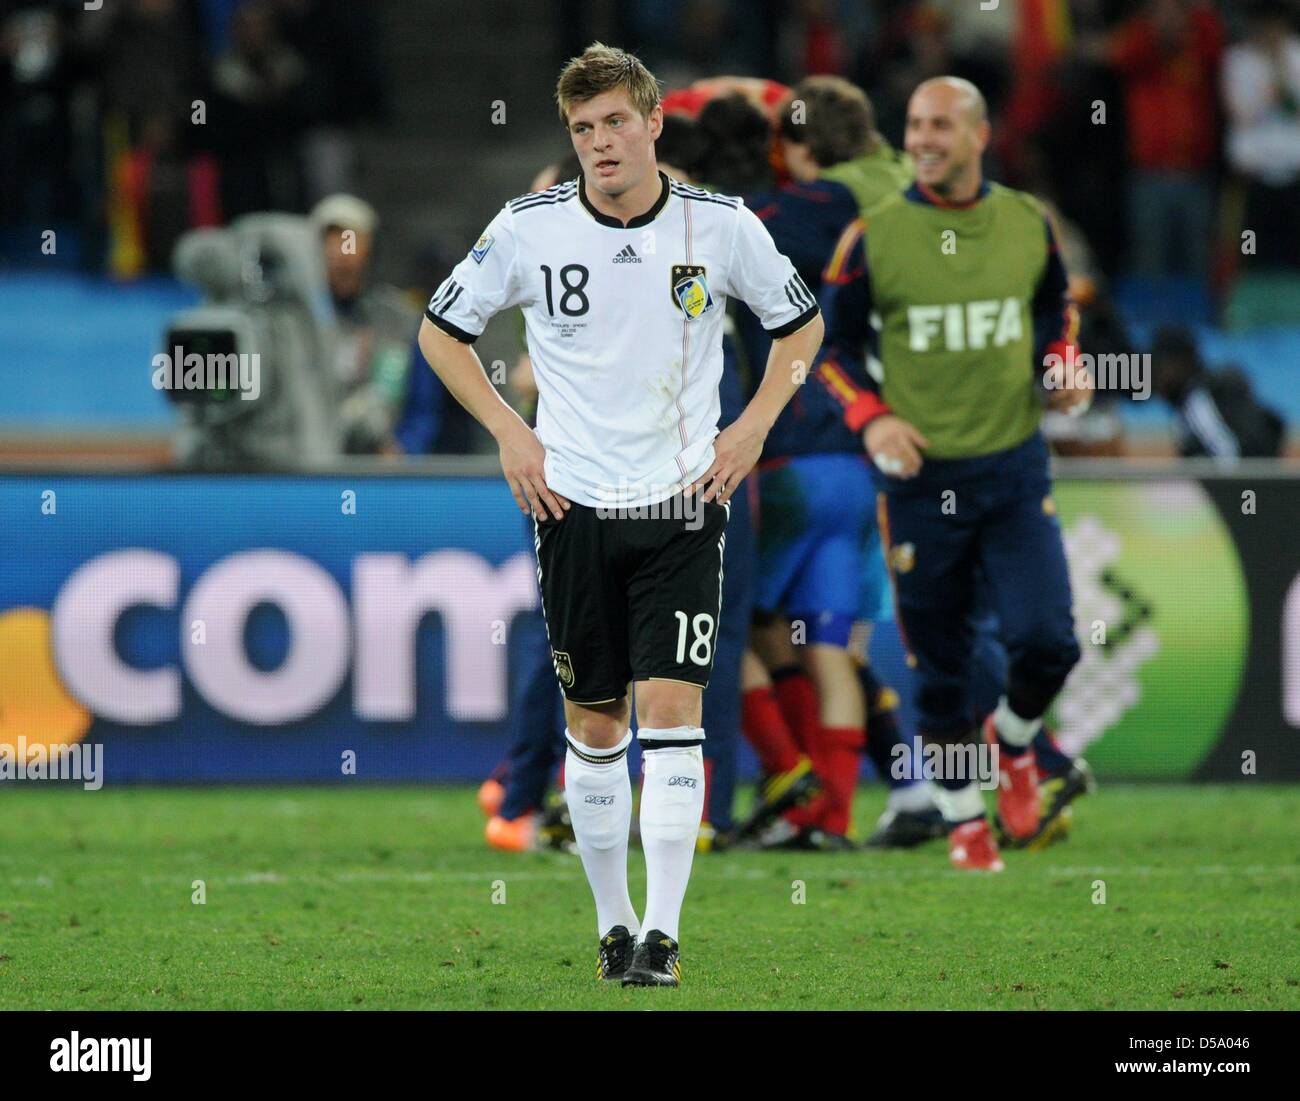 Germany's Toni Kroos walks by celebrating Spaniards after the 2010 FIFA  World Cup semi-final match between Germany and Spain at the Durban Stadium  in Durban, South Africa 07 July 2010. Spain won